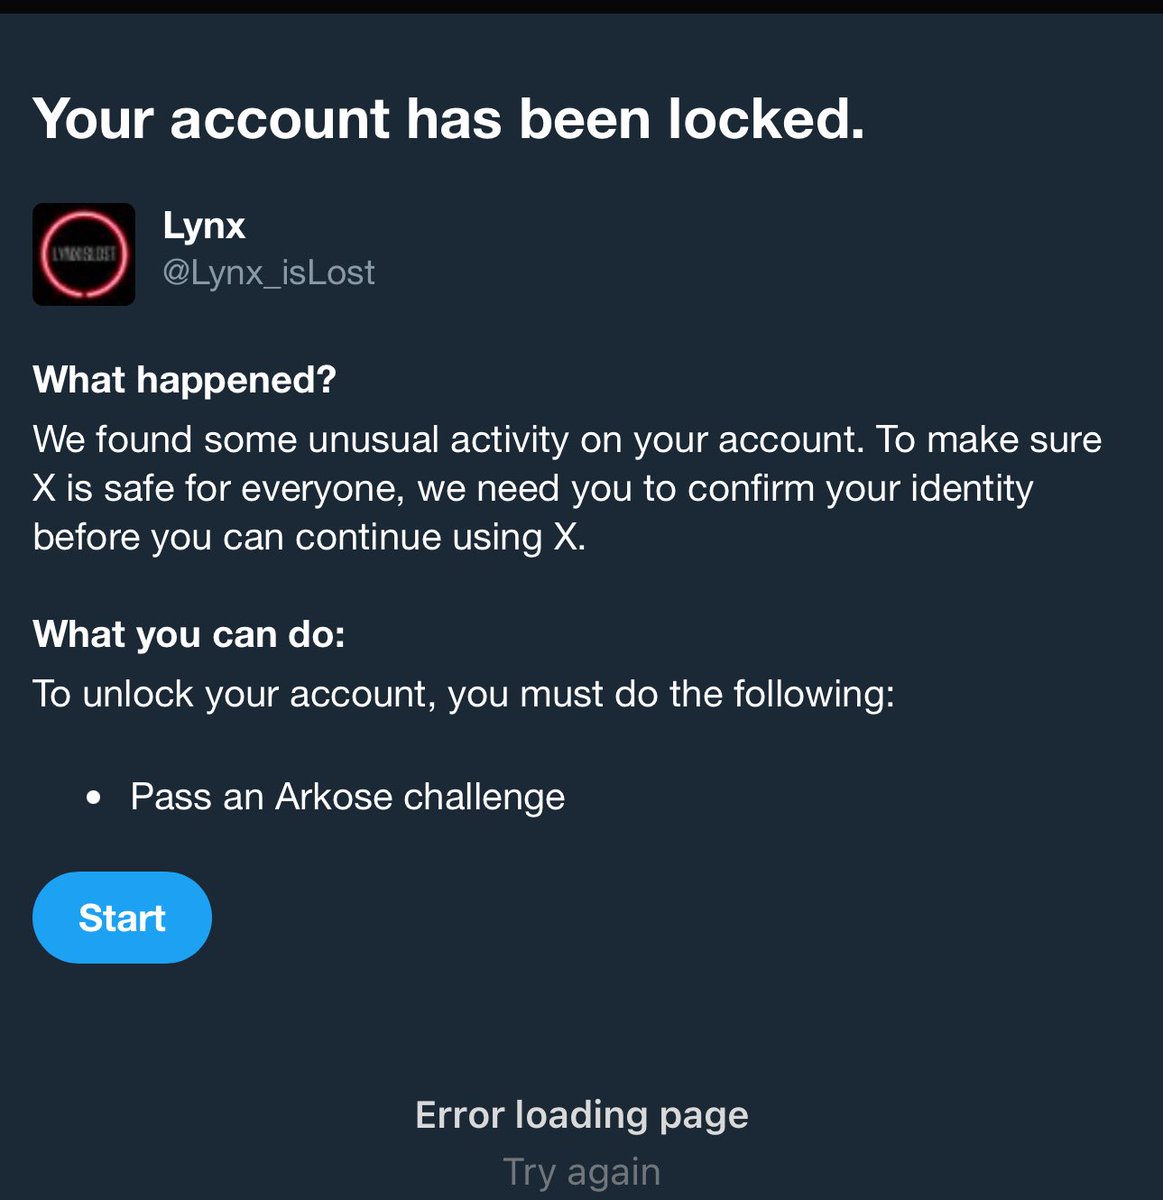 my account randomly got locked and unlocked straight away??? either way, this app is goin wild so follow me at @meIanchoIyheart just in case this account goes missing lmao